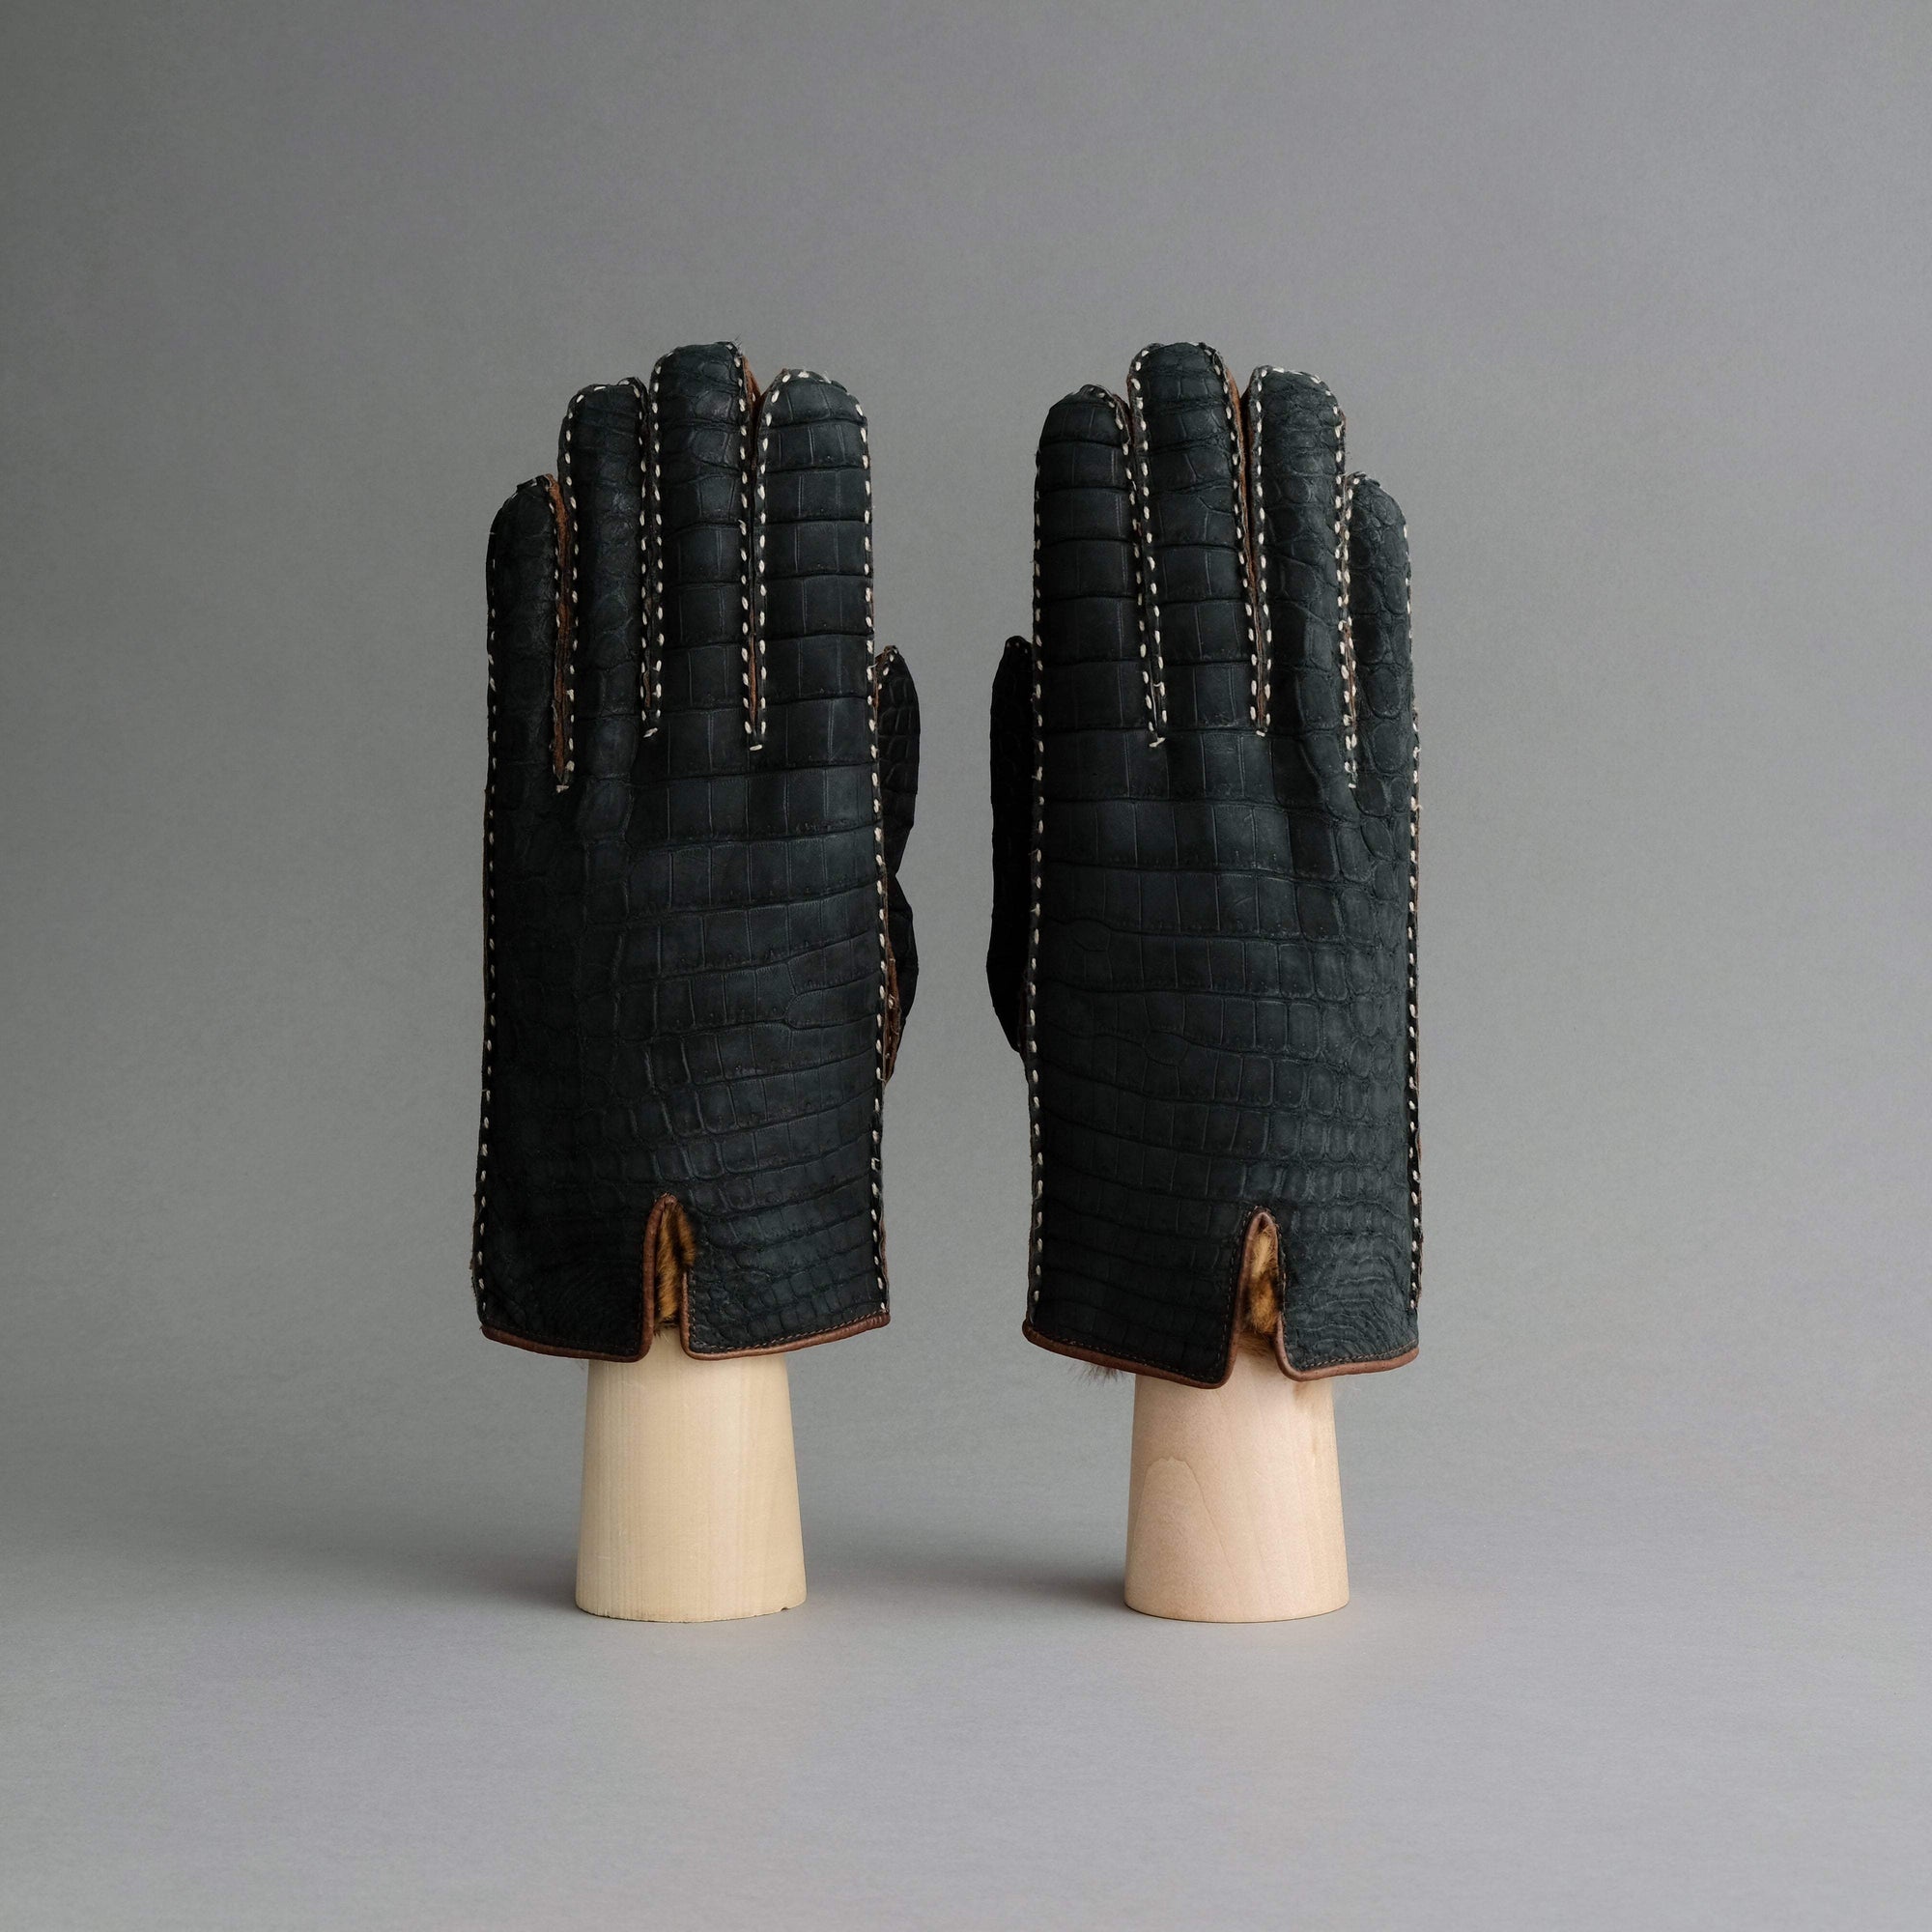 Gentlemen&#39;s Gloves from Crocodile and Peccary Leather - TR Handschuhe Wien - Thomas Riemer Handmade Gloves